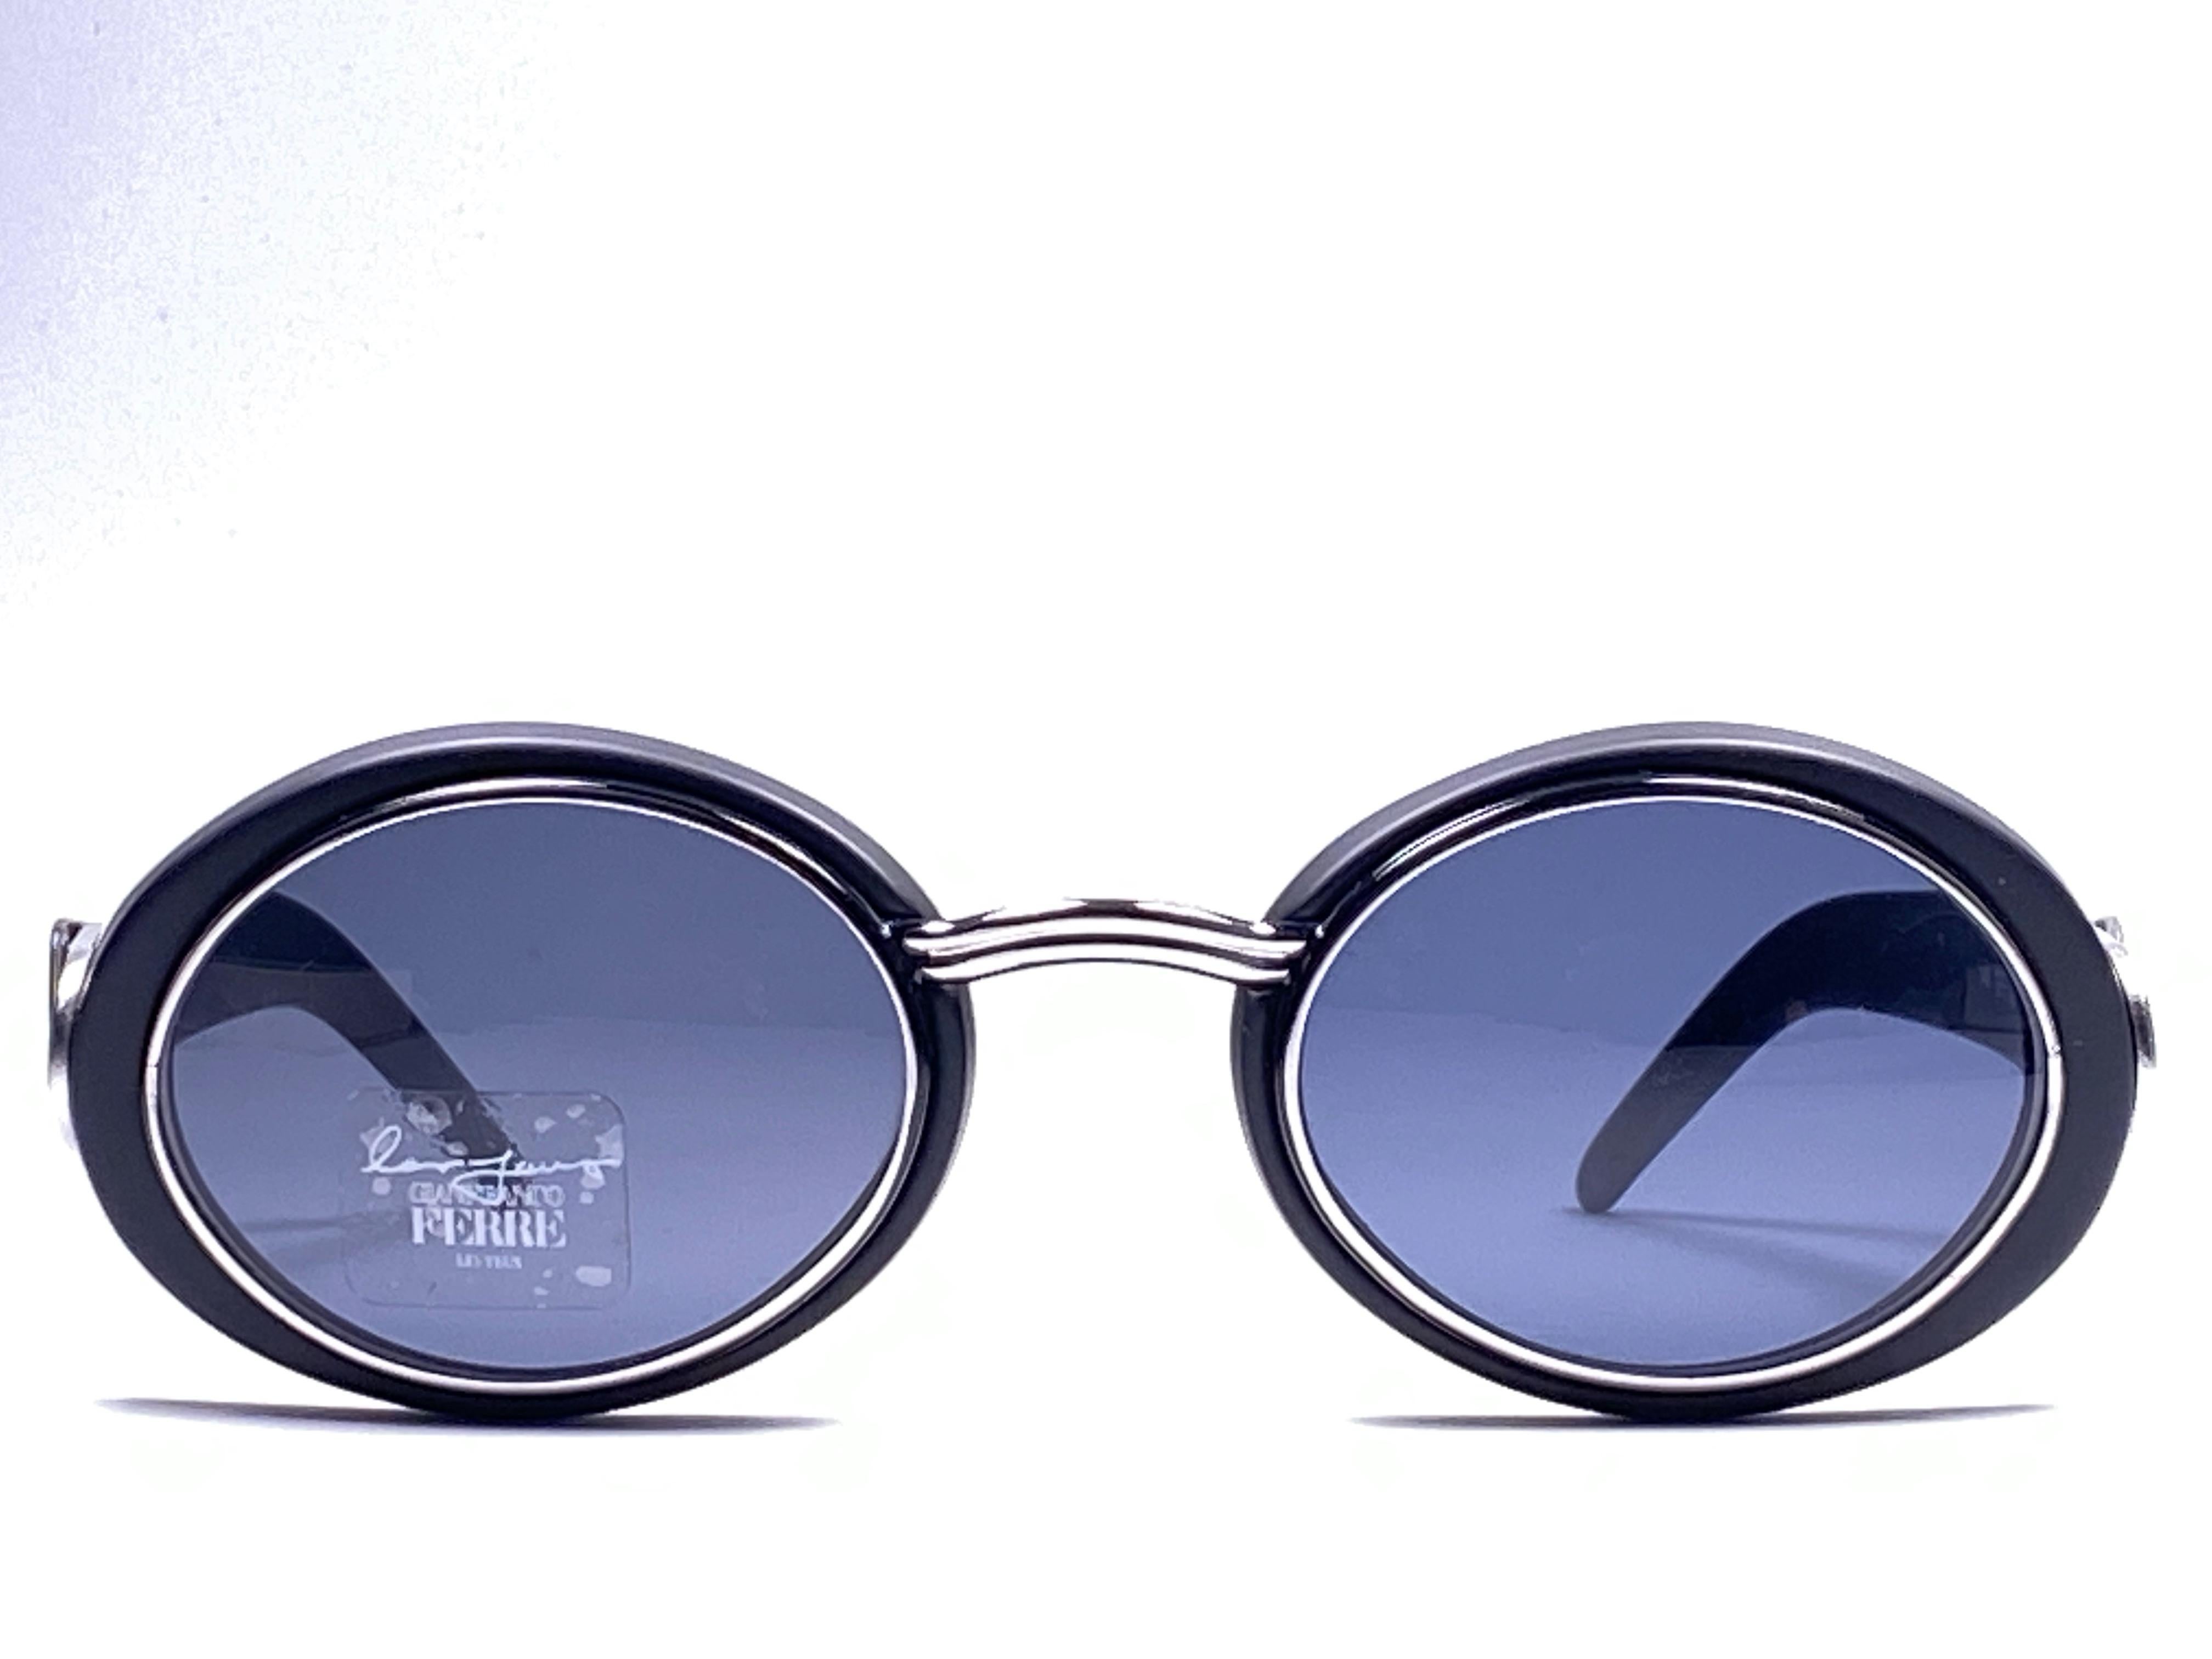 New vintage Gianfranco Ferre sunglasses.

Silver and black details frame holding a pair of spotless grey lenses.   

New, never worn or displayed. 

 Made in Italy.

MEASUREMENTS 



FRONT : 13.5 CMS

LENS HEIGHT : 3.6 CMS

LENS WIDTH : 4.6 CMS